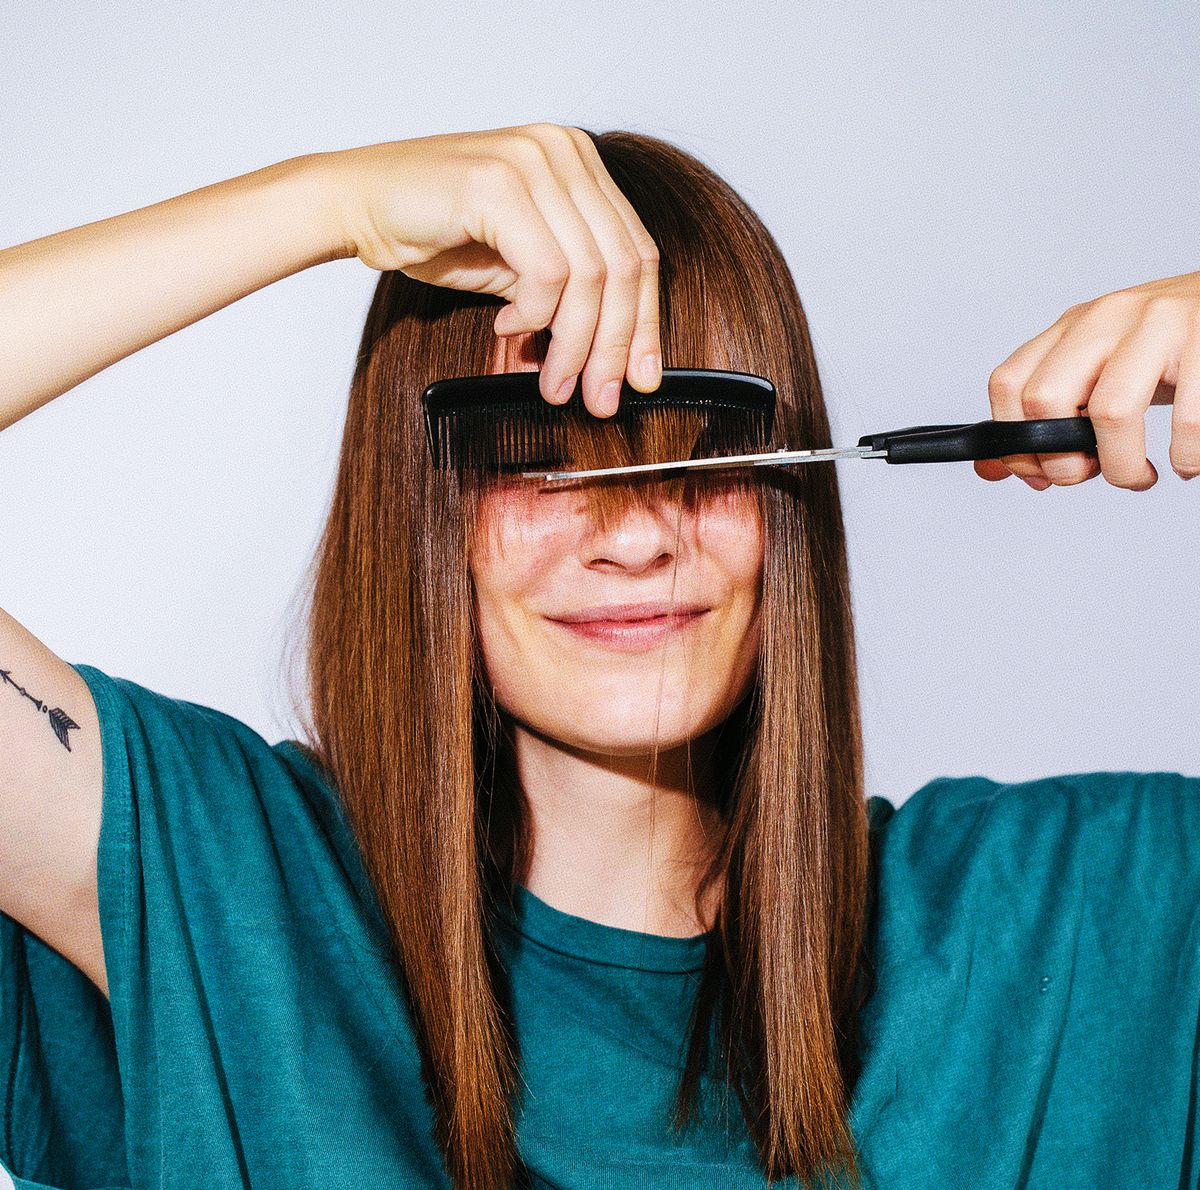 How to Trim Your Own Hair at Home in 2023, According to Experts